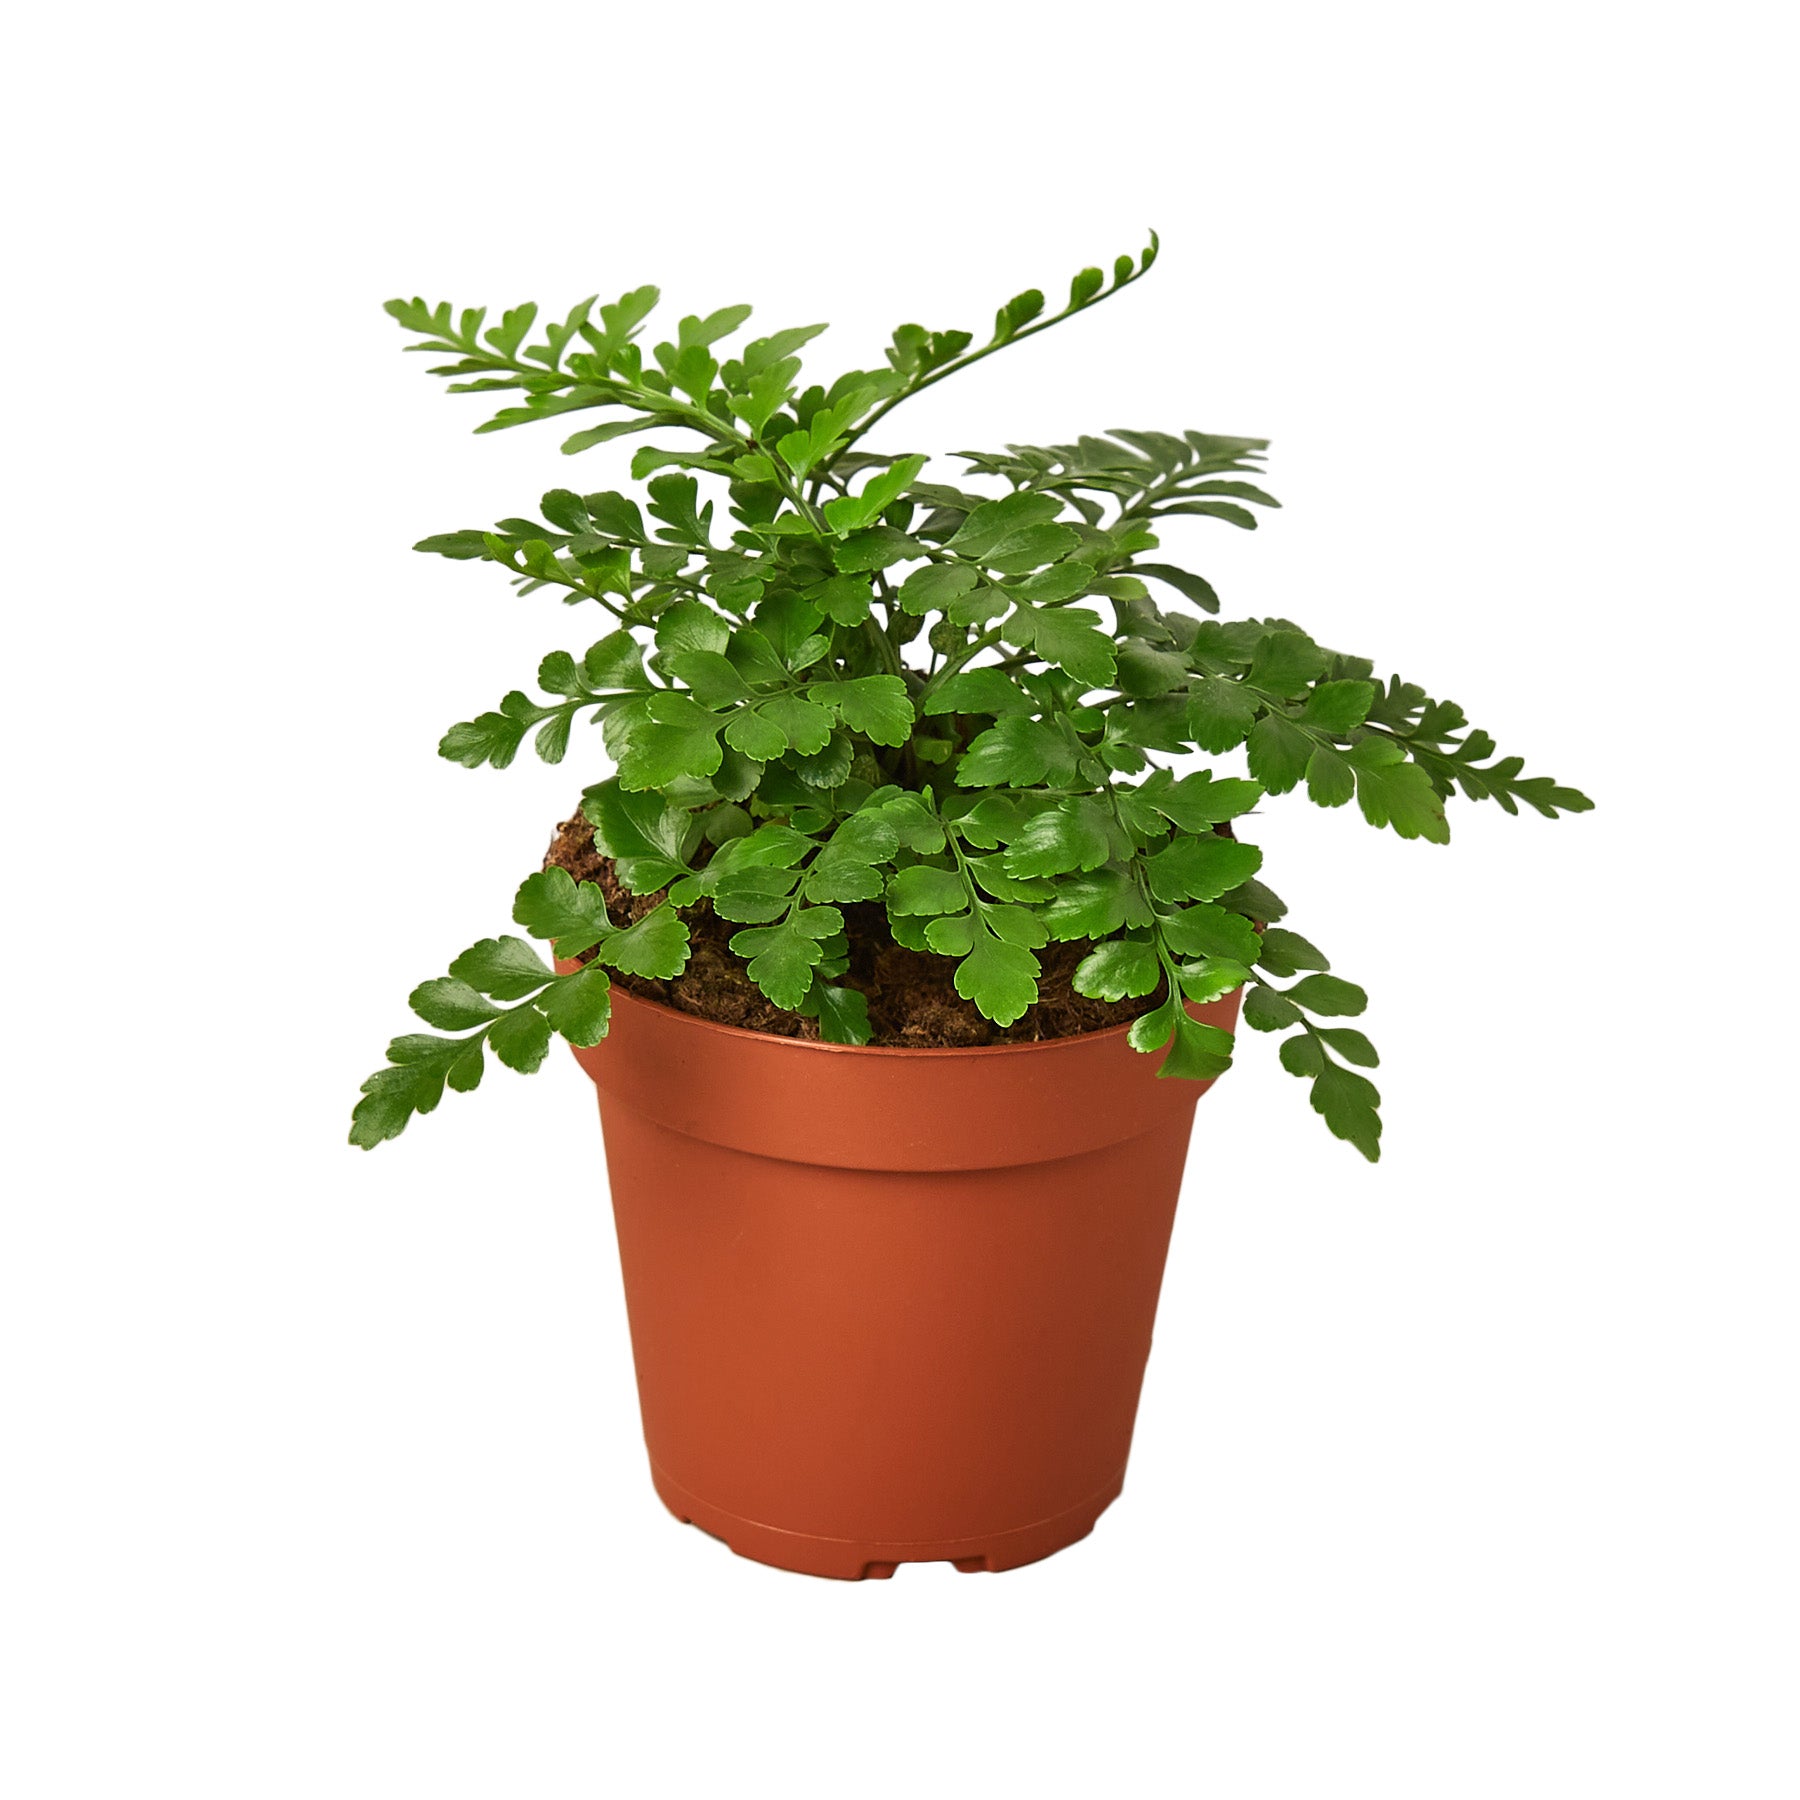 A small plant in a pot on a white background, sourced from one of the best garden nurseries near me.